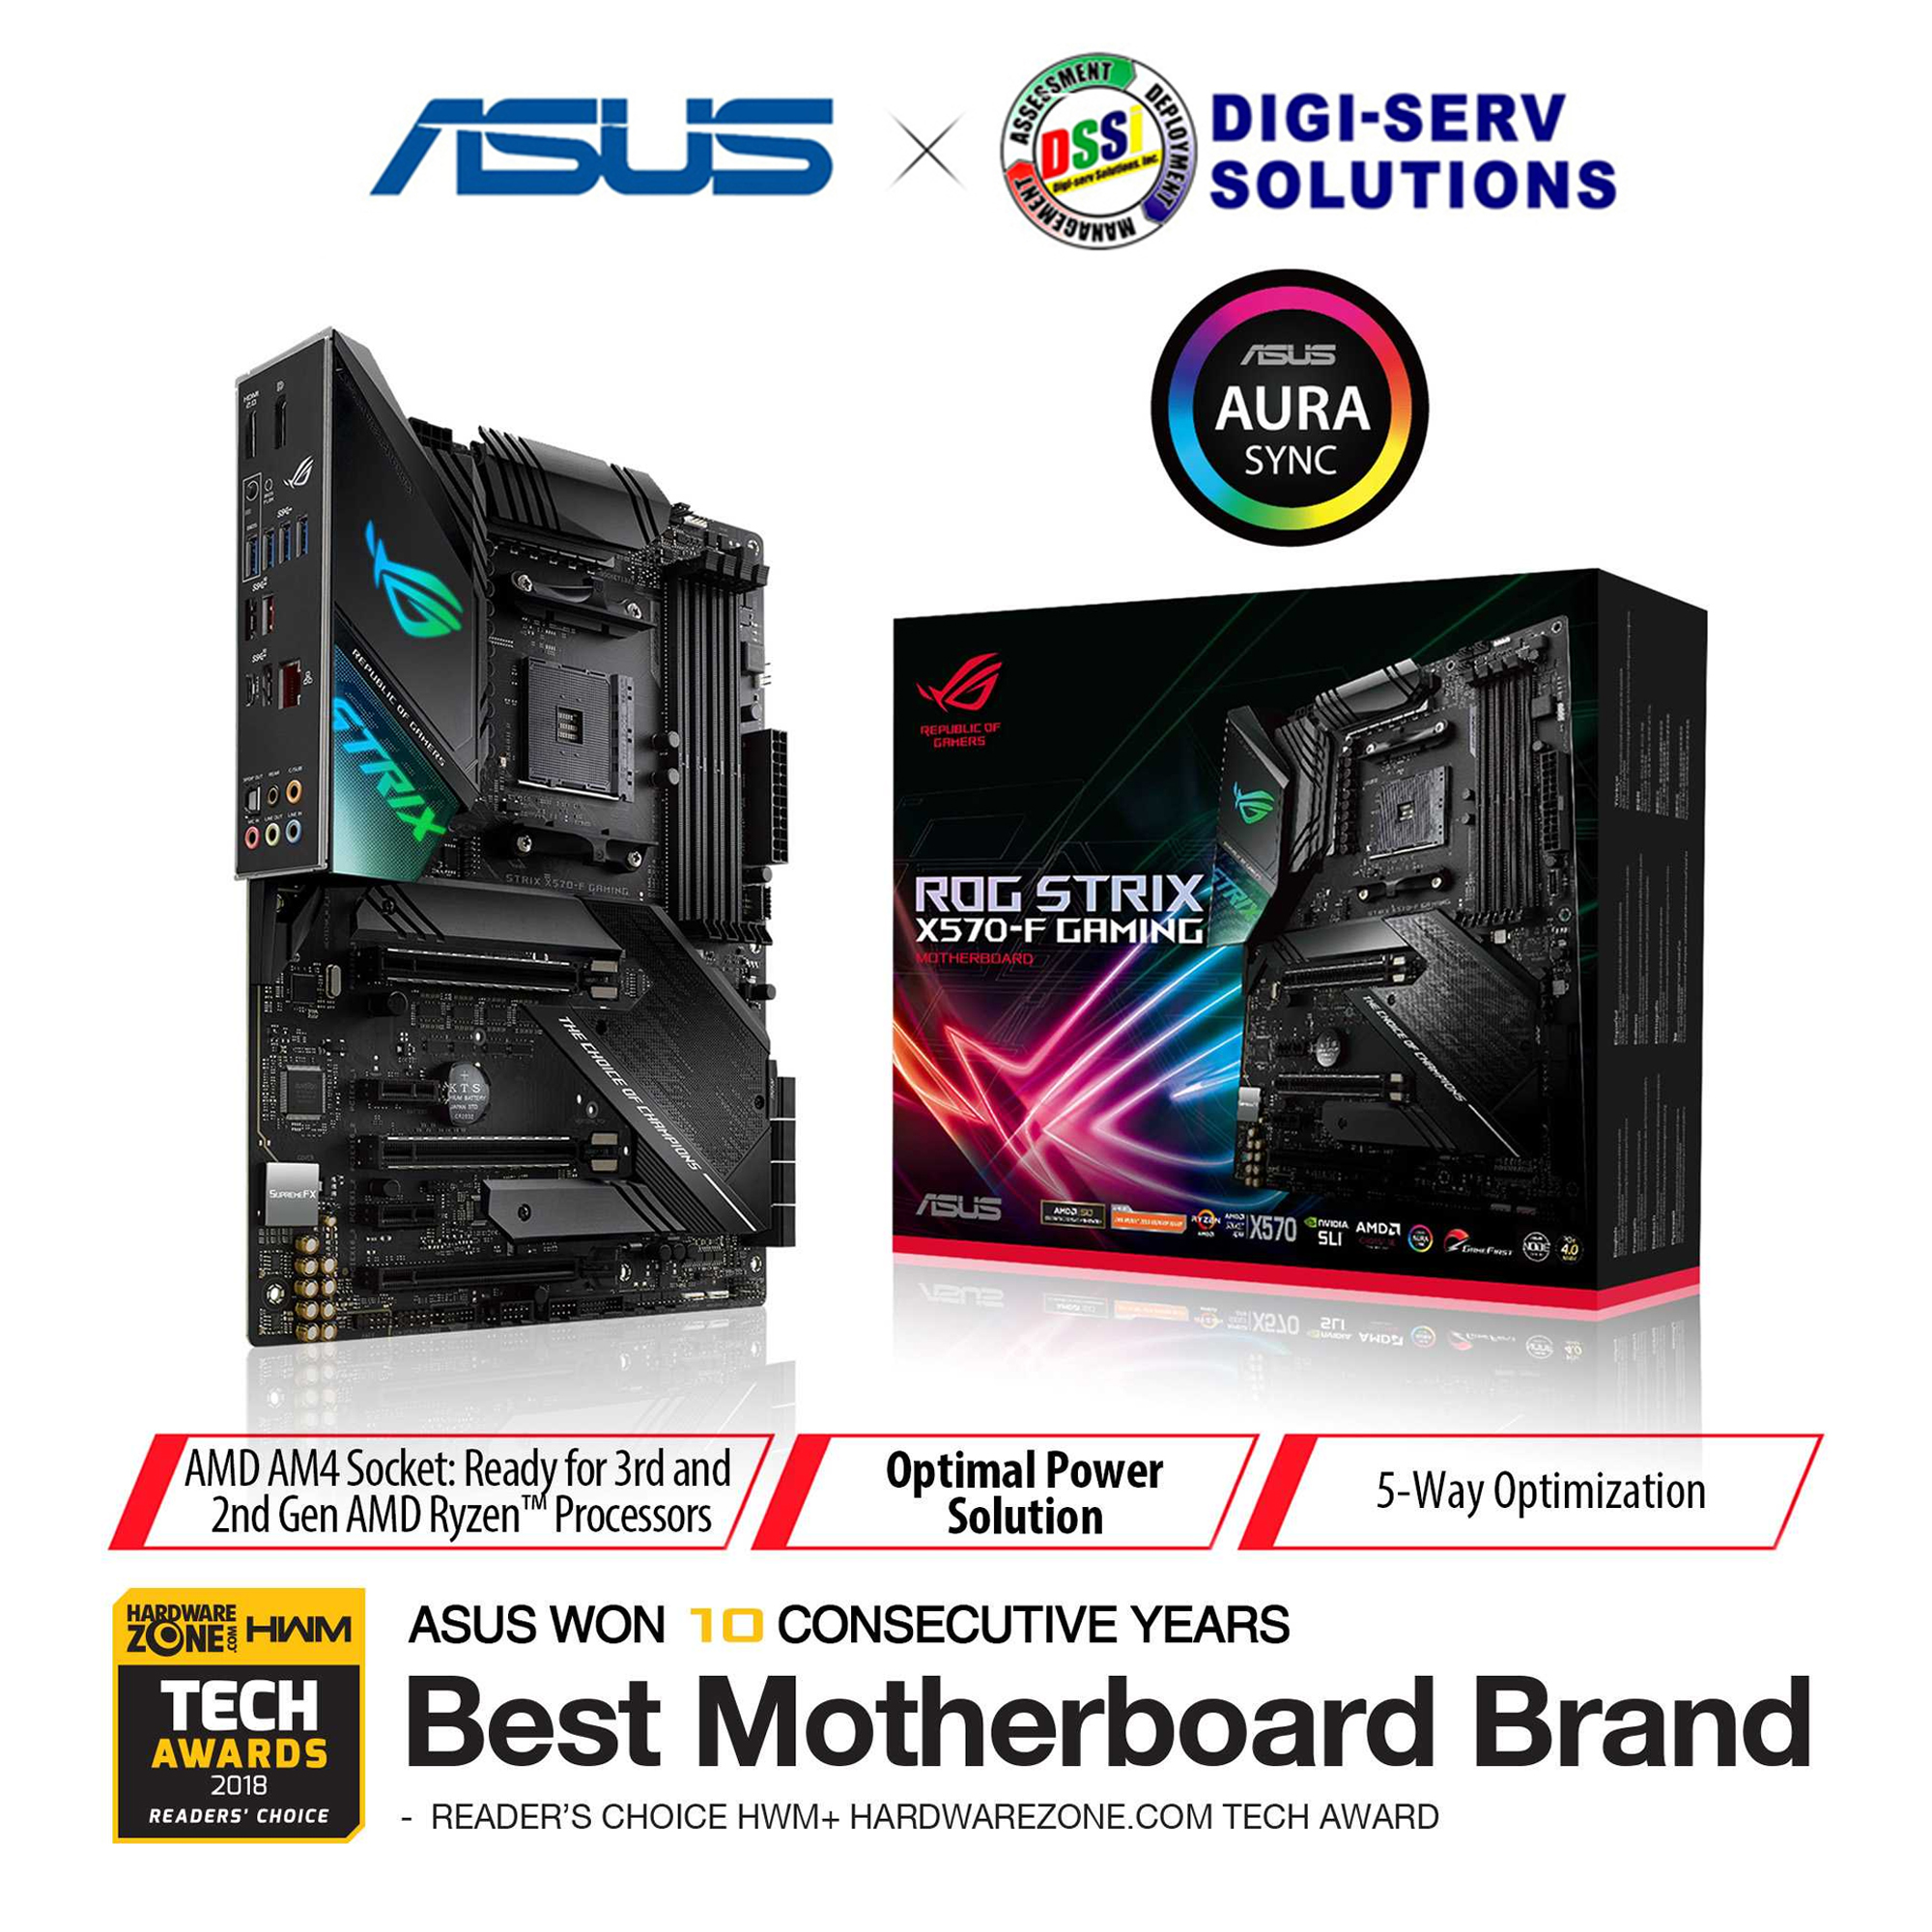 Asus ROG STRIX X570-F GAMING ATX AMD AM4 Gaming Motherboard with ...